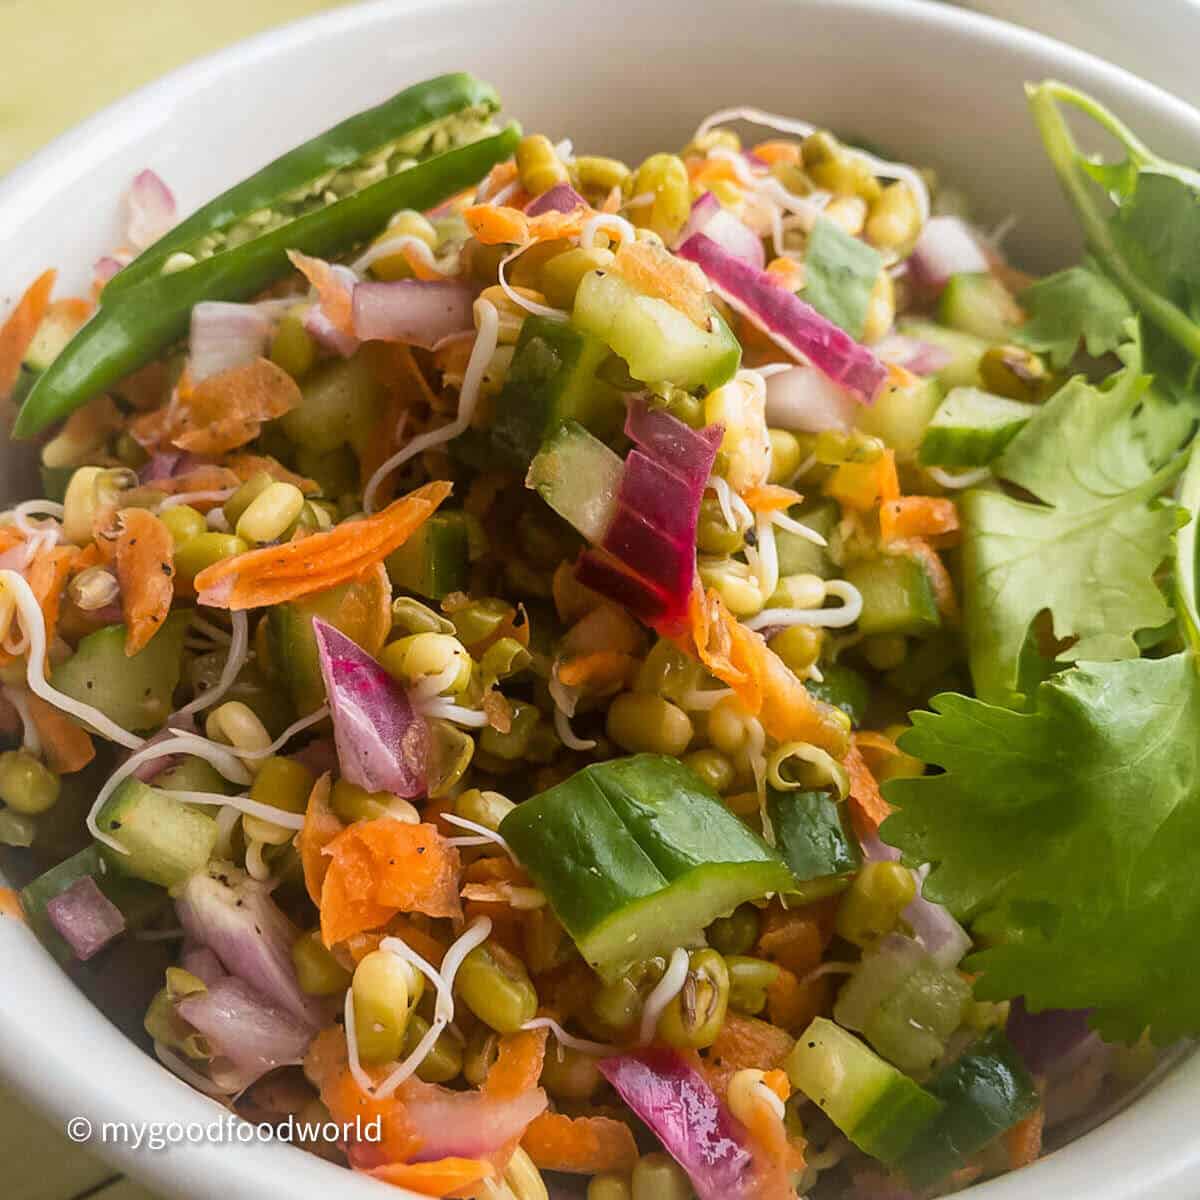 Sprouted green gram salad with onions, herbs, and fresh vegetables in a round white bowl.